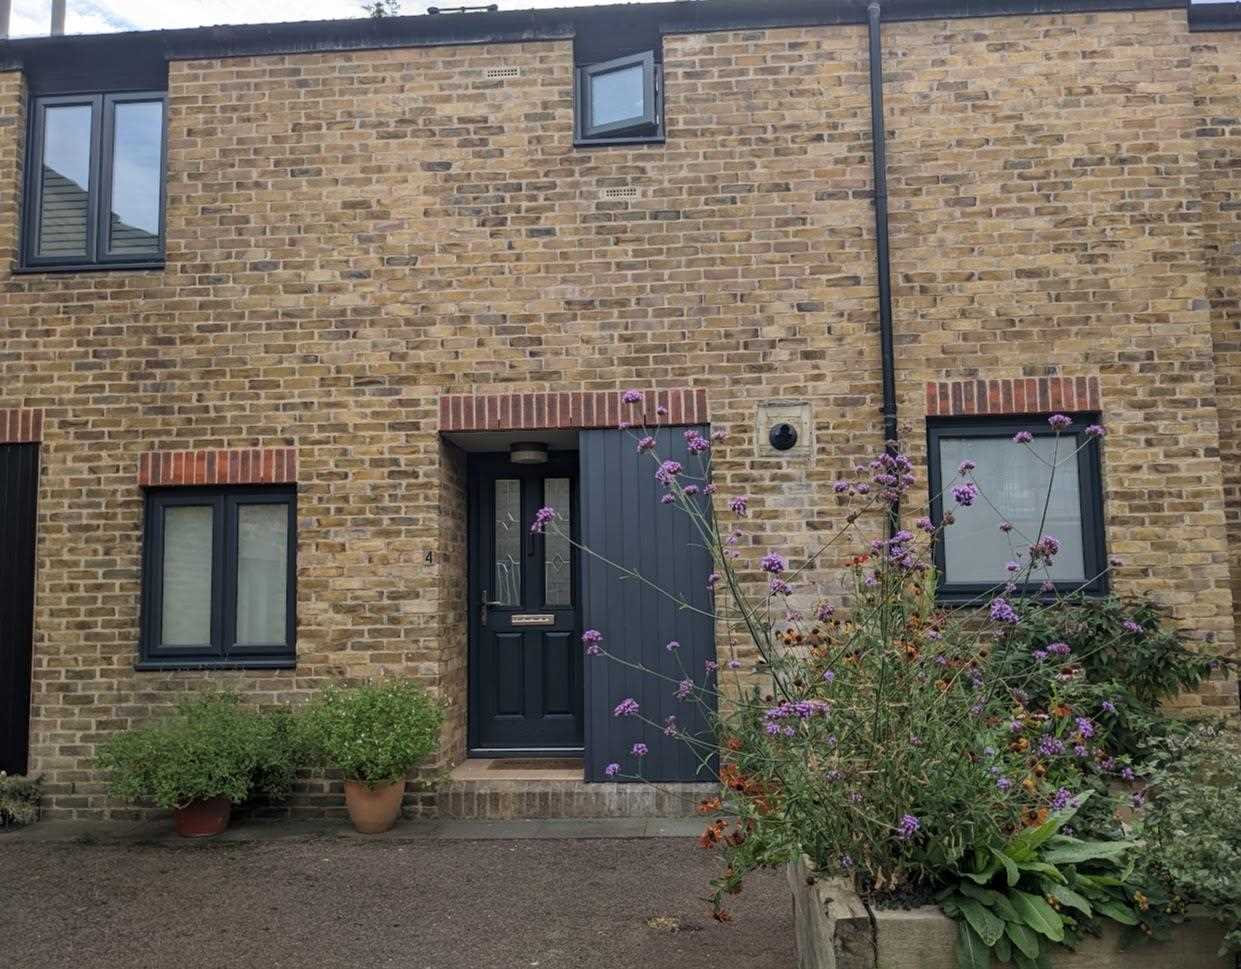 AVAILABLE FROM 9TH SEPTEMBER 2022. Modern and attractive UNFURNISHED terraced house (arranged over 77 sq.m) in a secluded cul sac close to shops and transport facilities of Junction Road including Archway underground station (Northern Line). The accommodation comprises of three bedrooms, ...